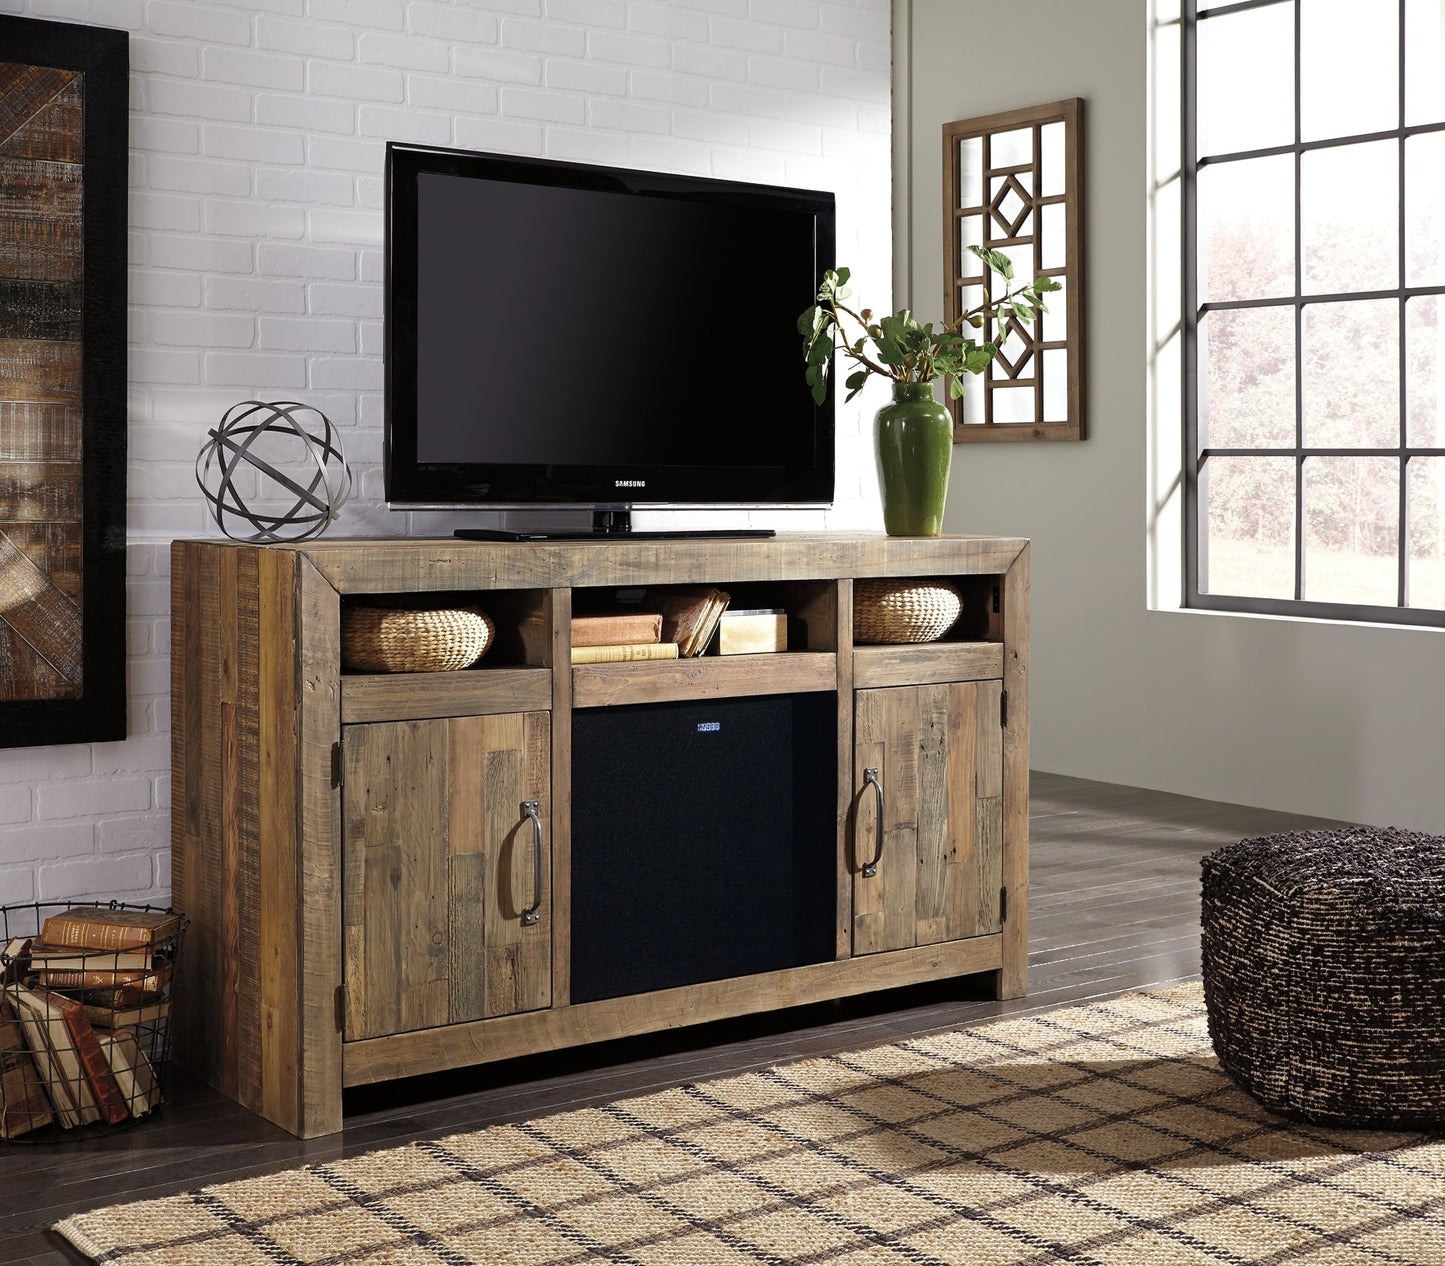 Sommerford LG TV Stand w/Fireplace Option at Cloud 9 Mattress & Furniture furniture, home furnishing, home decor